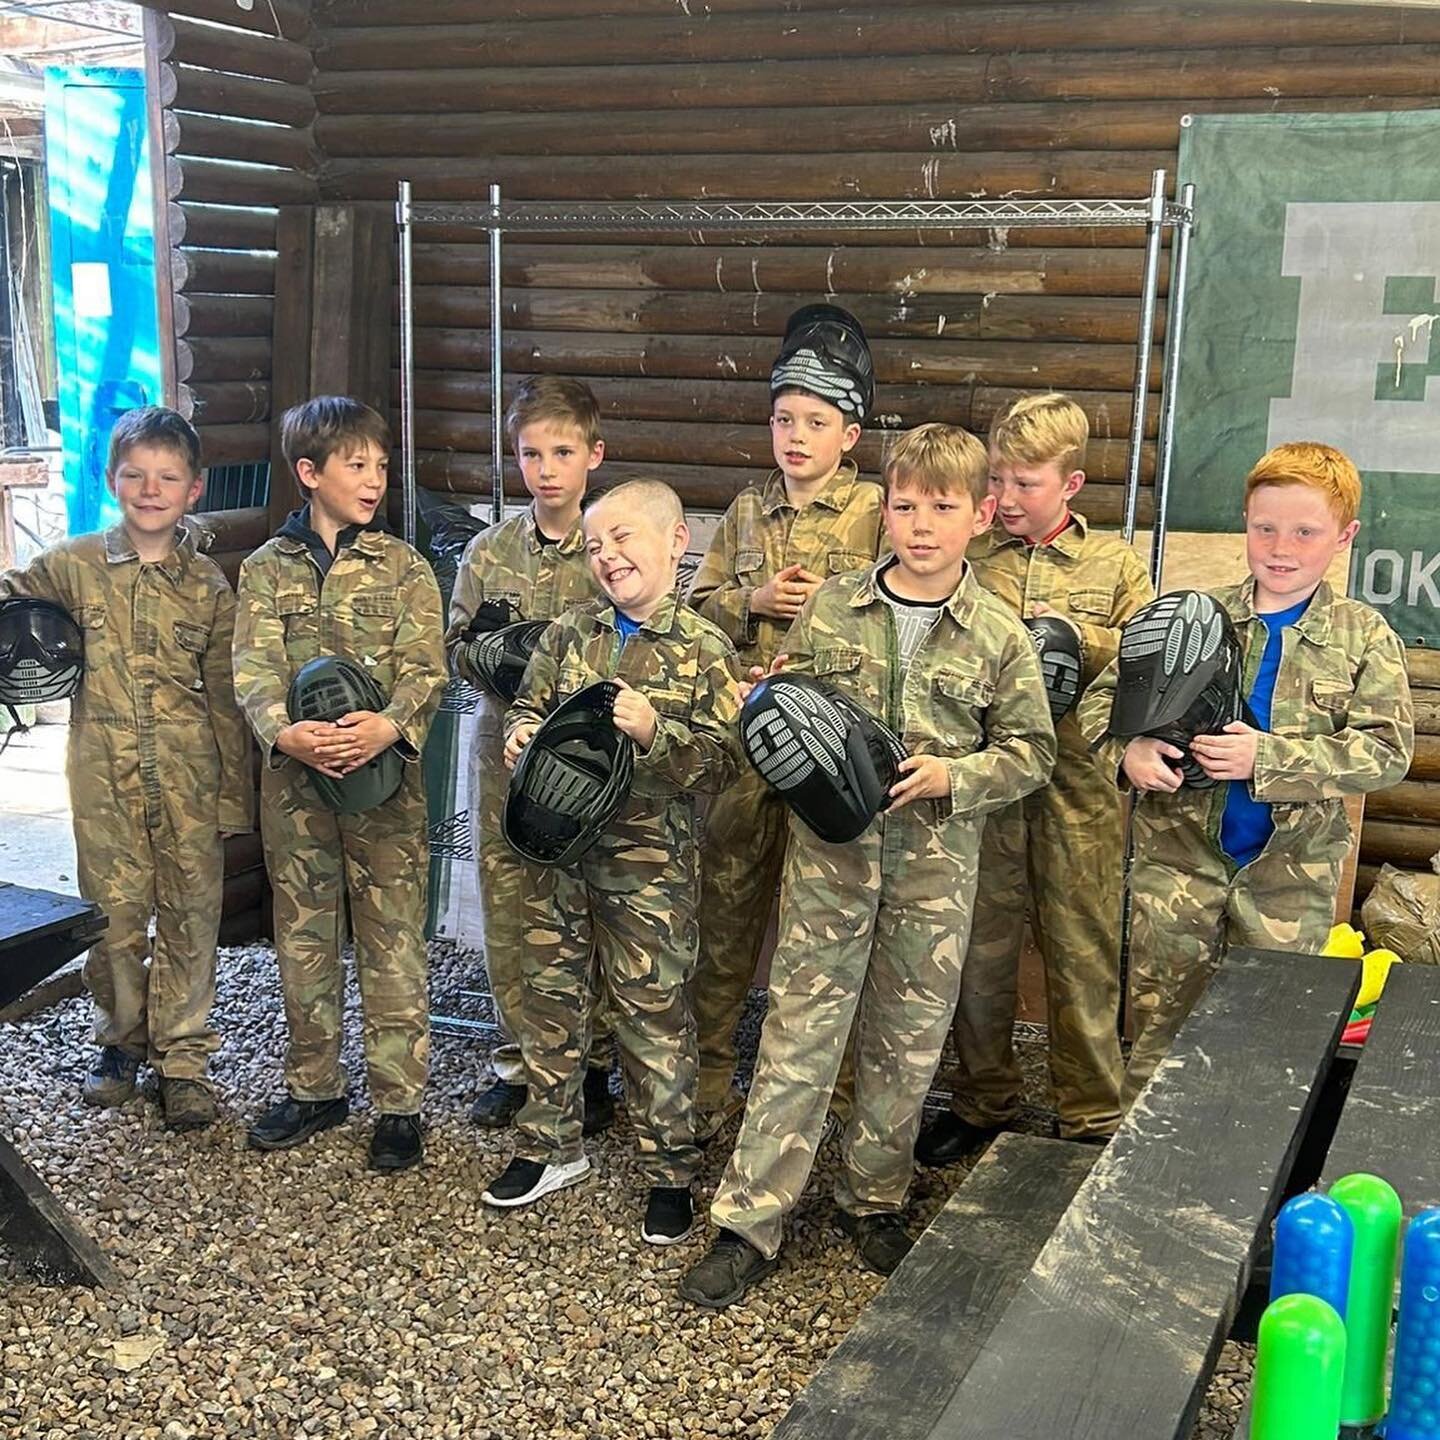 Risers U9 Yellows turned their hands to another type of &lsquo;shooting&rsquo; this week.  They went paintballing at @quexadventurefarmpark 

Thank you @risingstarsyouthfc for supporting team building beyond the football pitch. All the kids had a gre